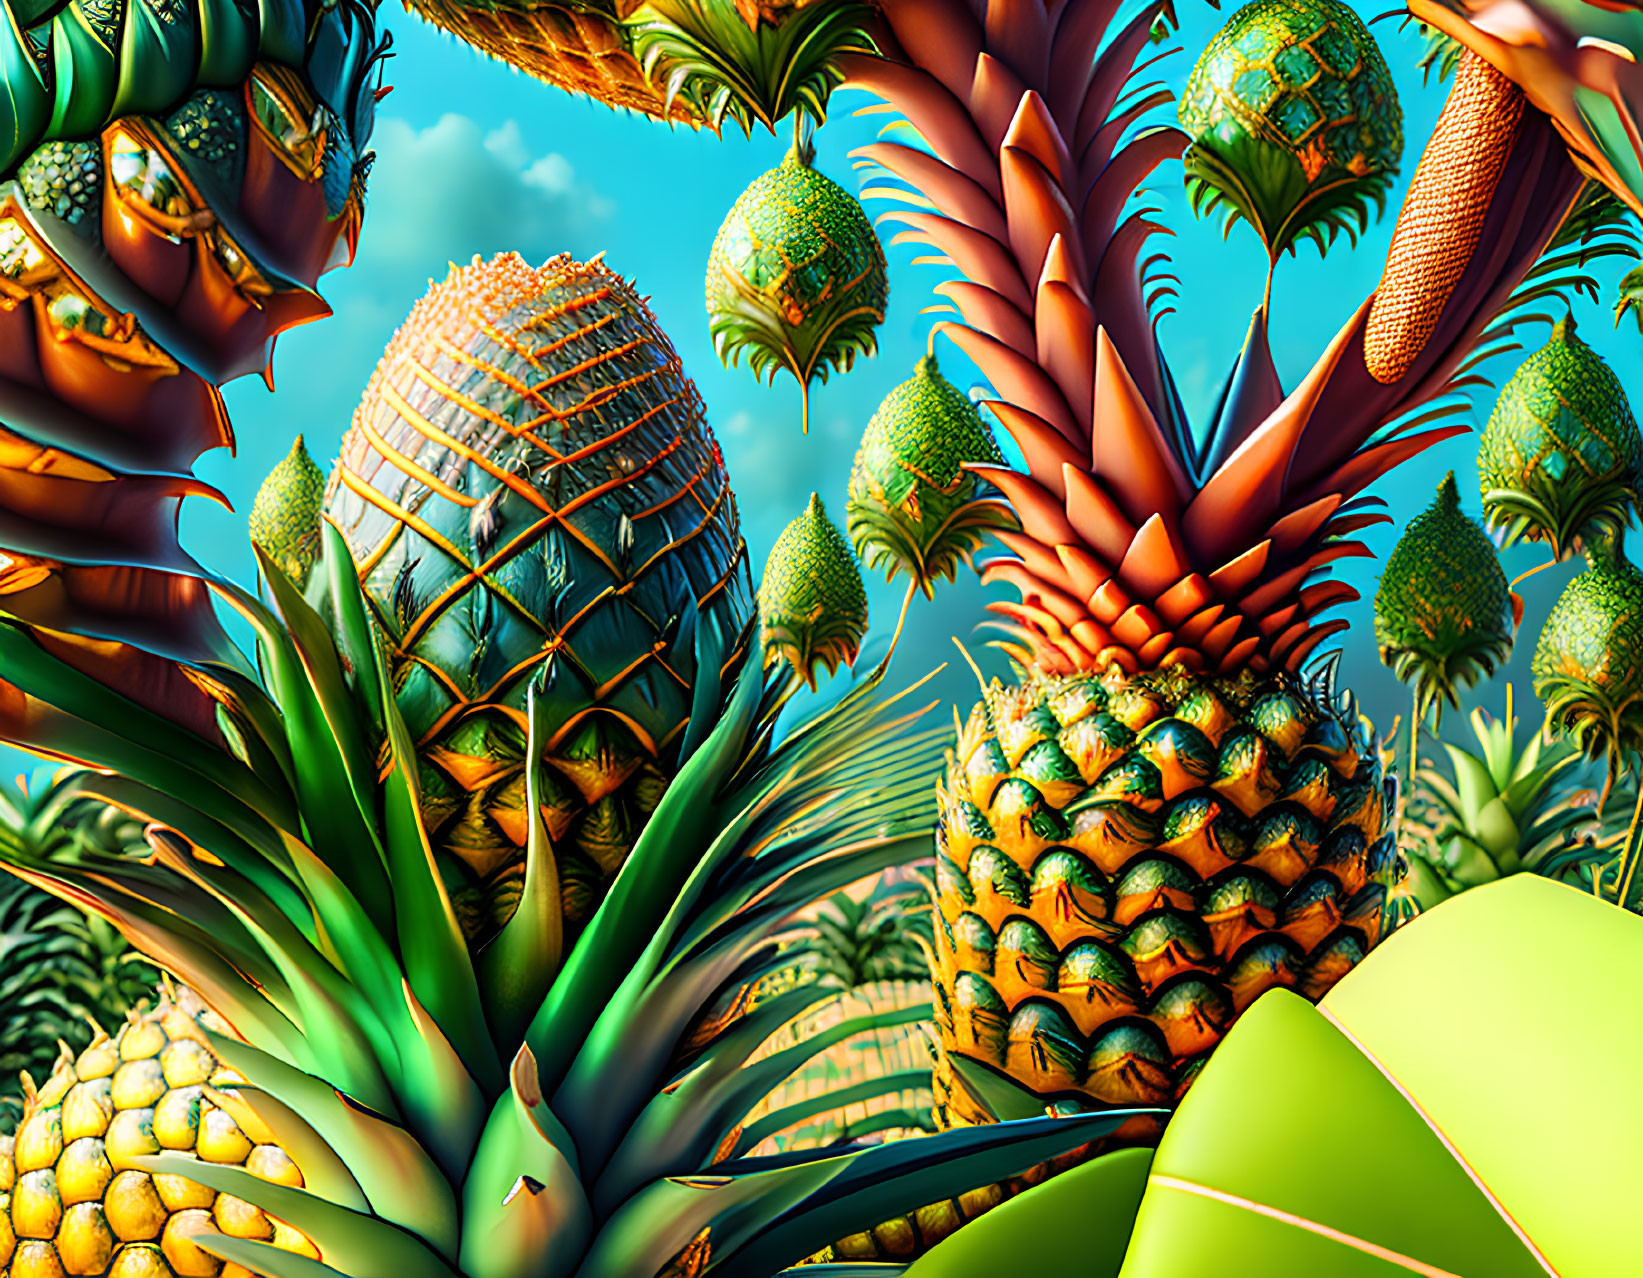 Vibrant surreal landscape with stylized pineapples and palms in geometric patterns